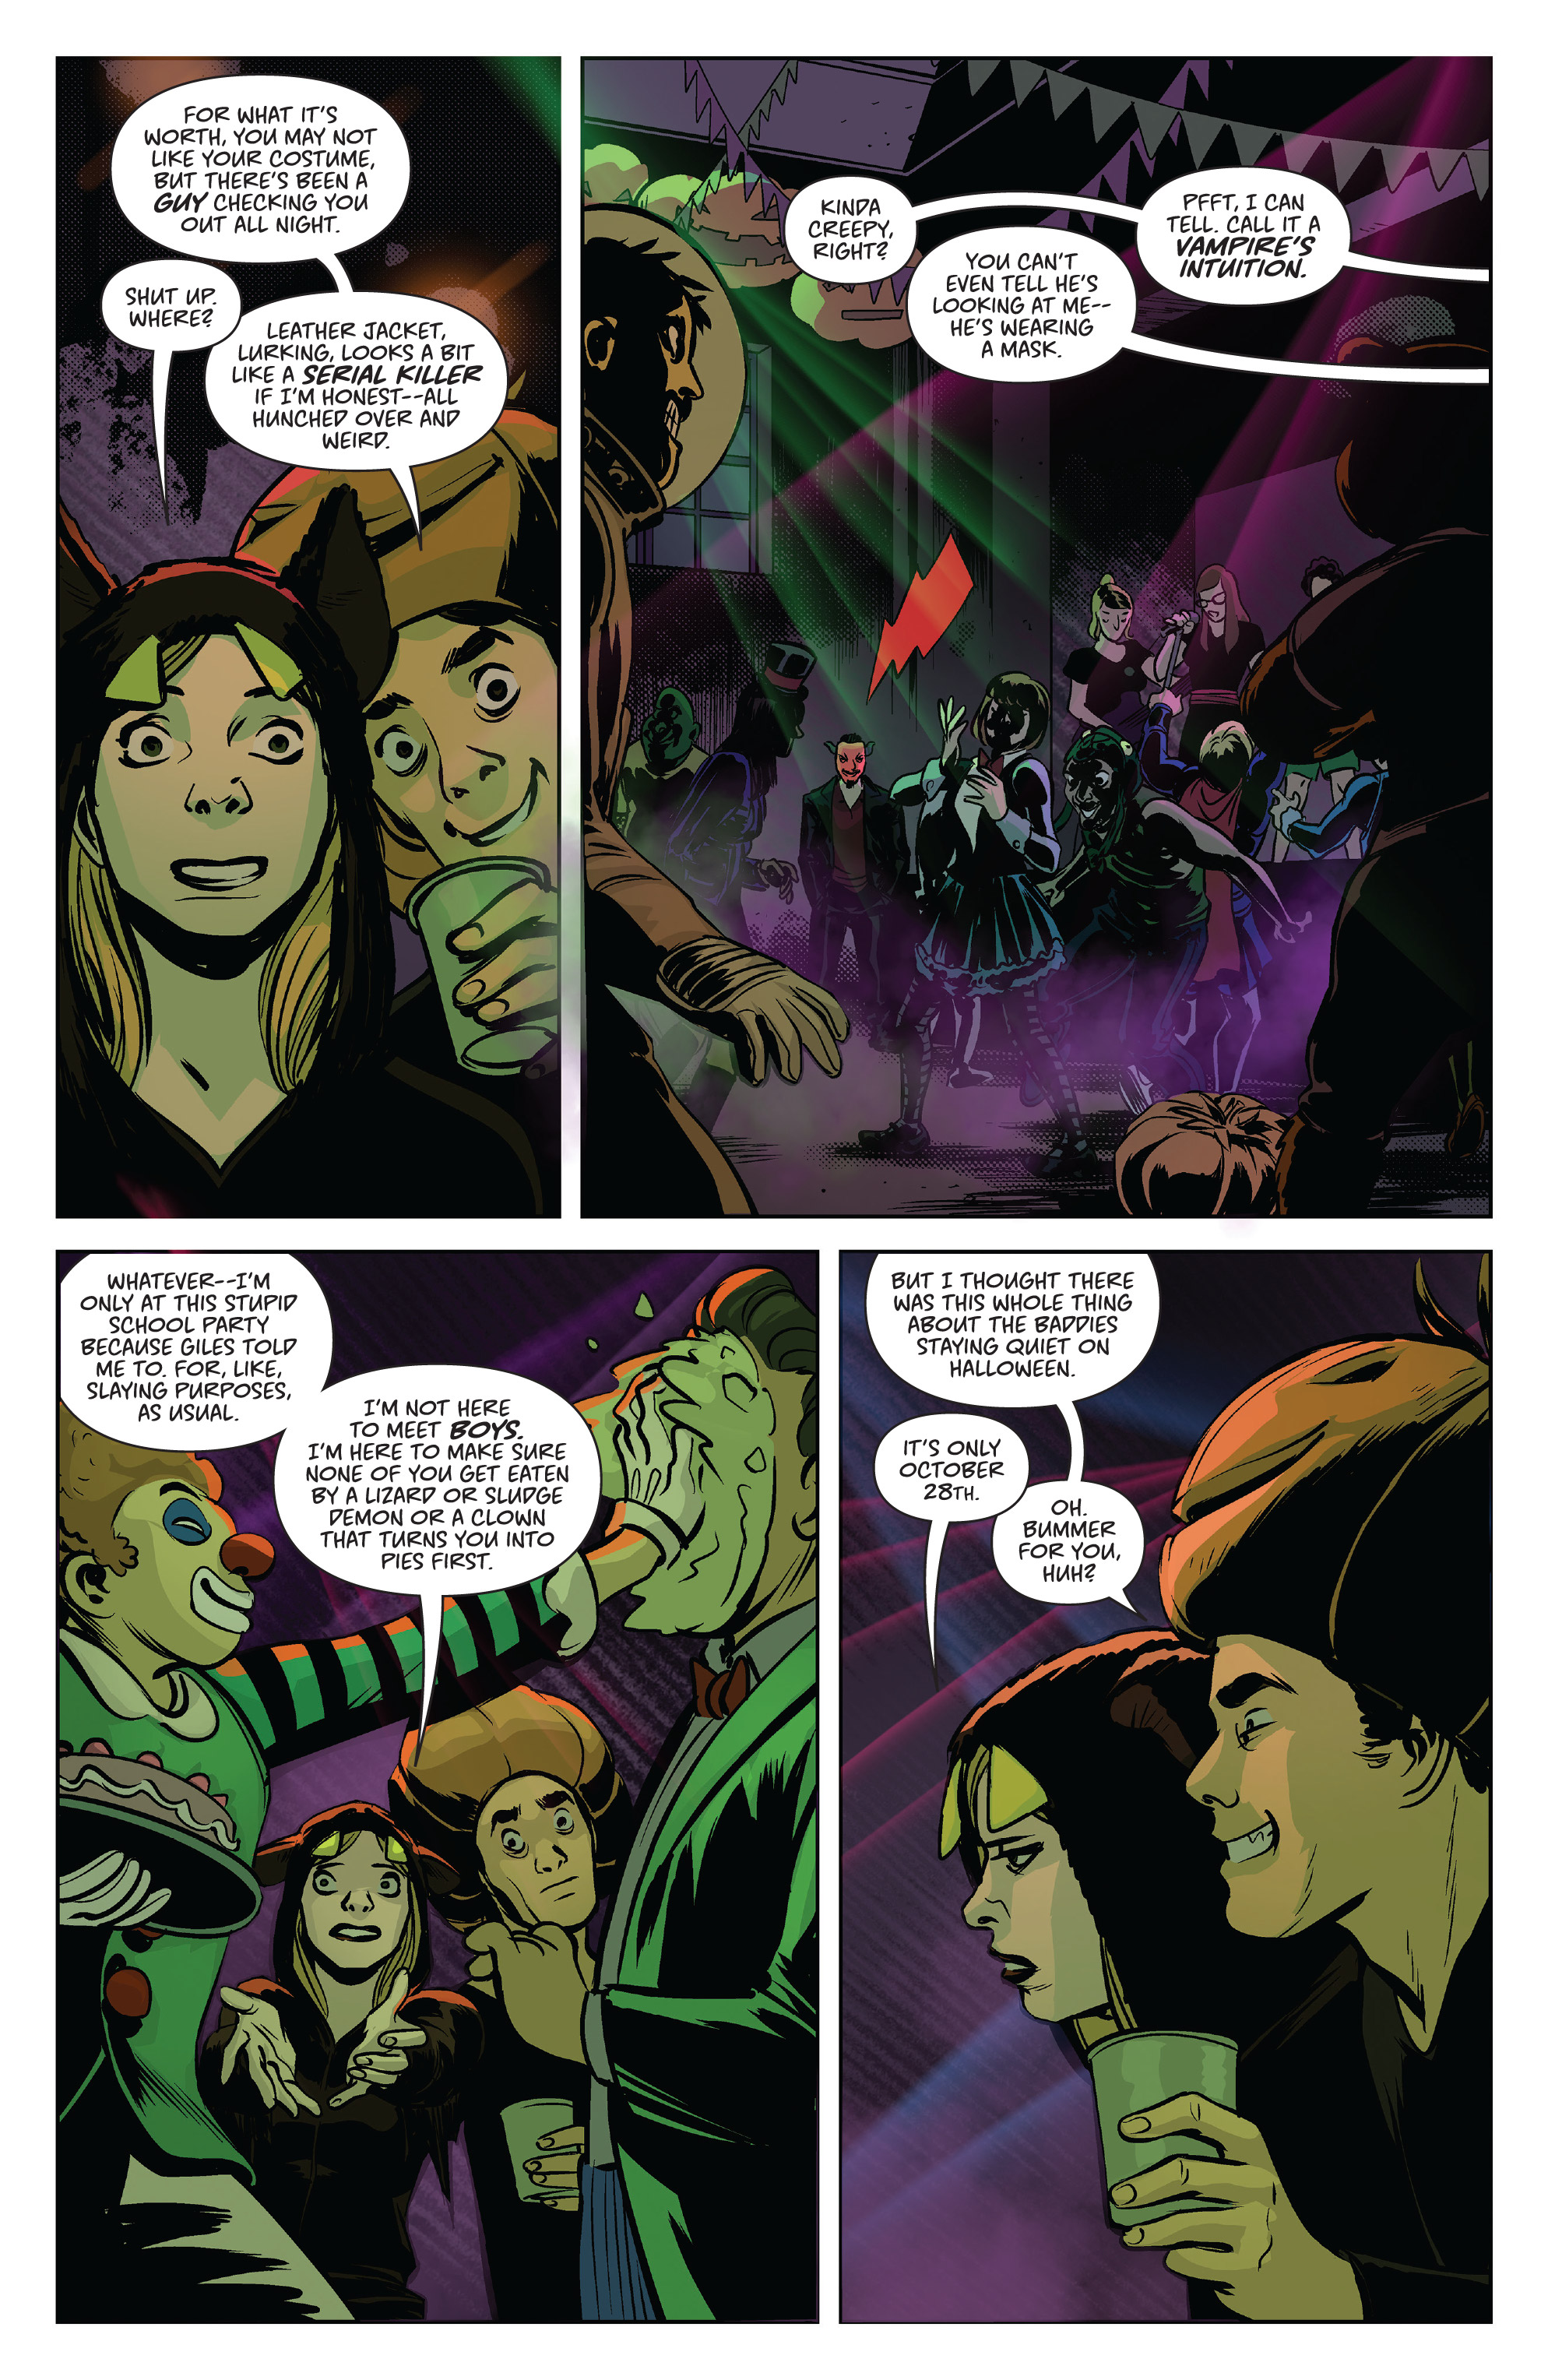 Buffy the Vampire Slayer (2019-): Chapter 8 - Page 4